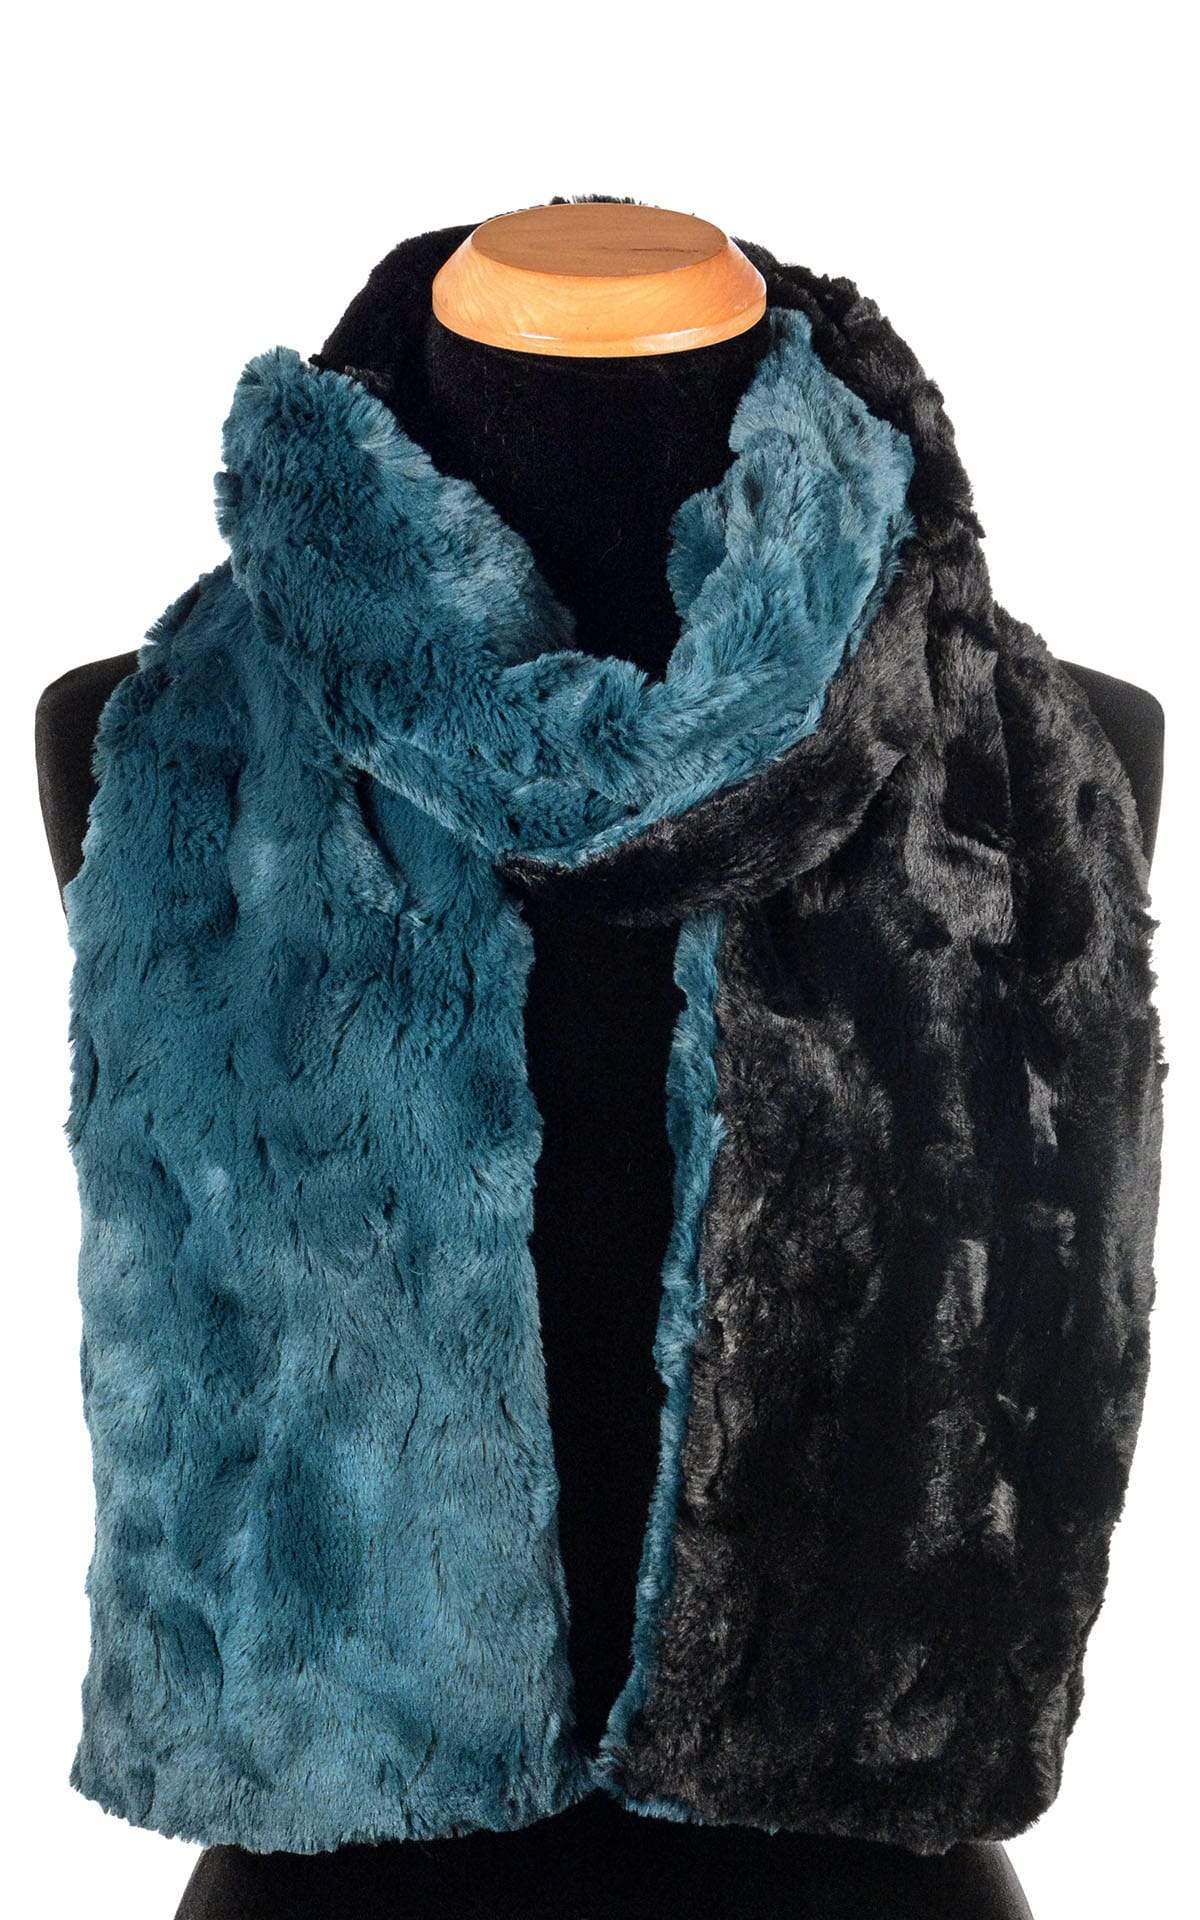 Women’s Product shot on mannequin of Two-tone Classic Scarf  shown looped| Peacock Pond blue/teal Faux Fur with cuddly black | Handmade by Pandemonium Millinery Seattle, WA USA